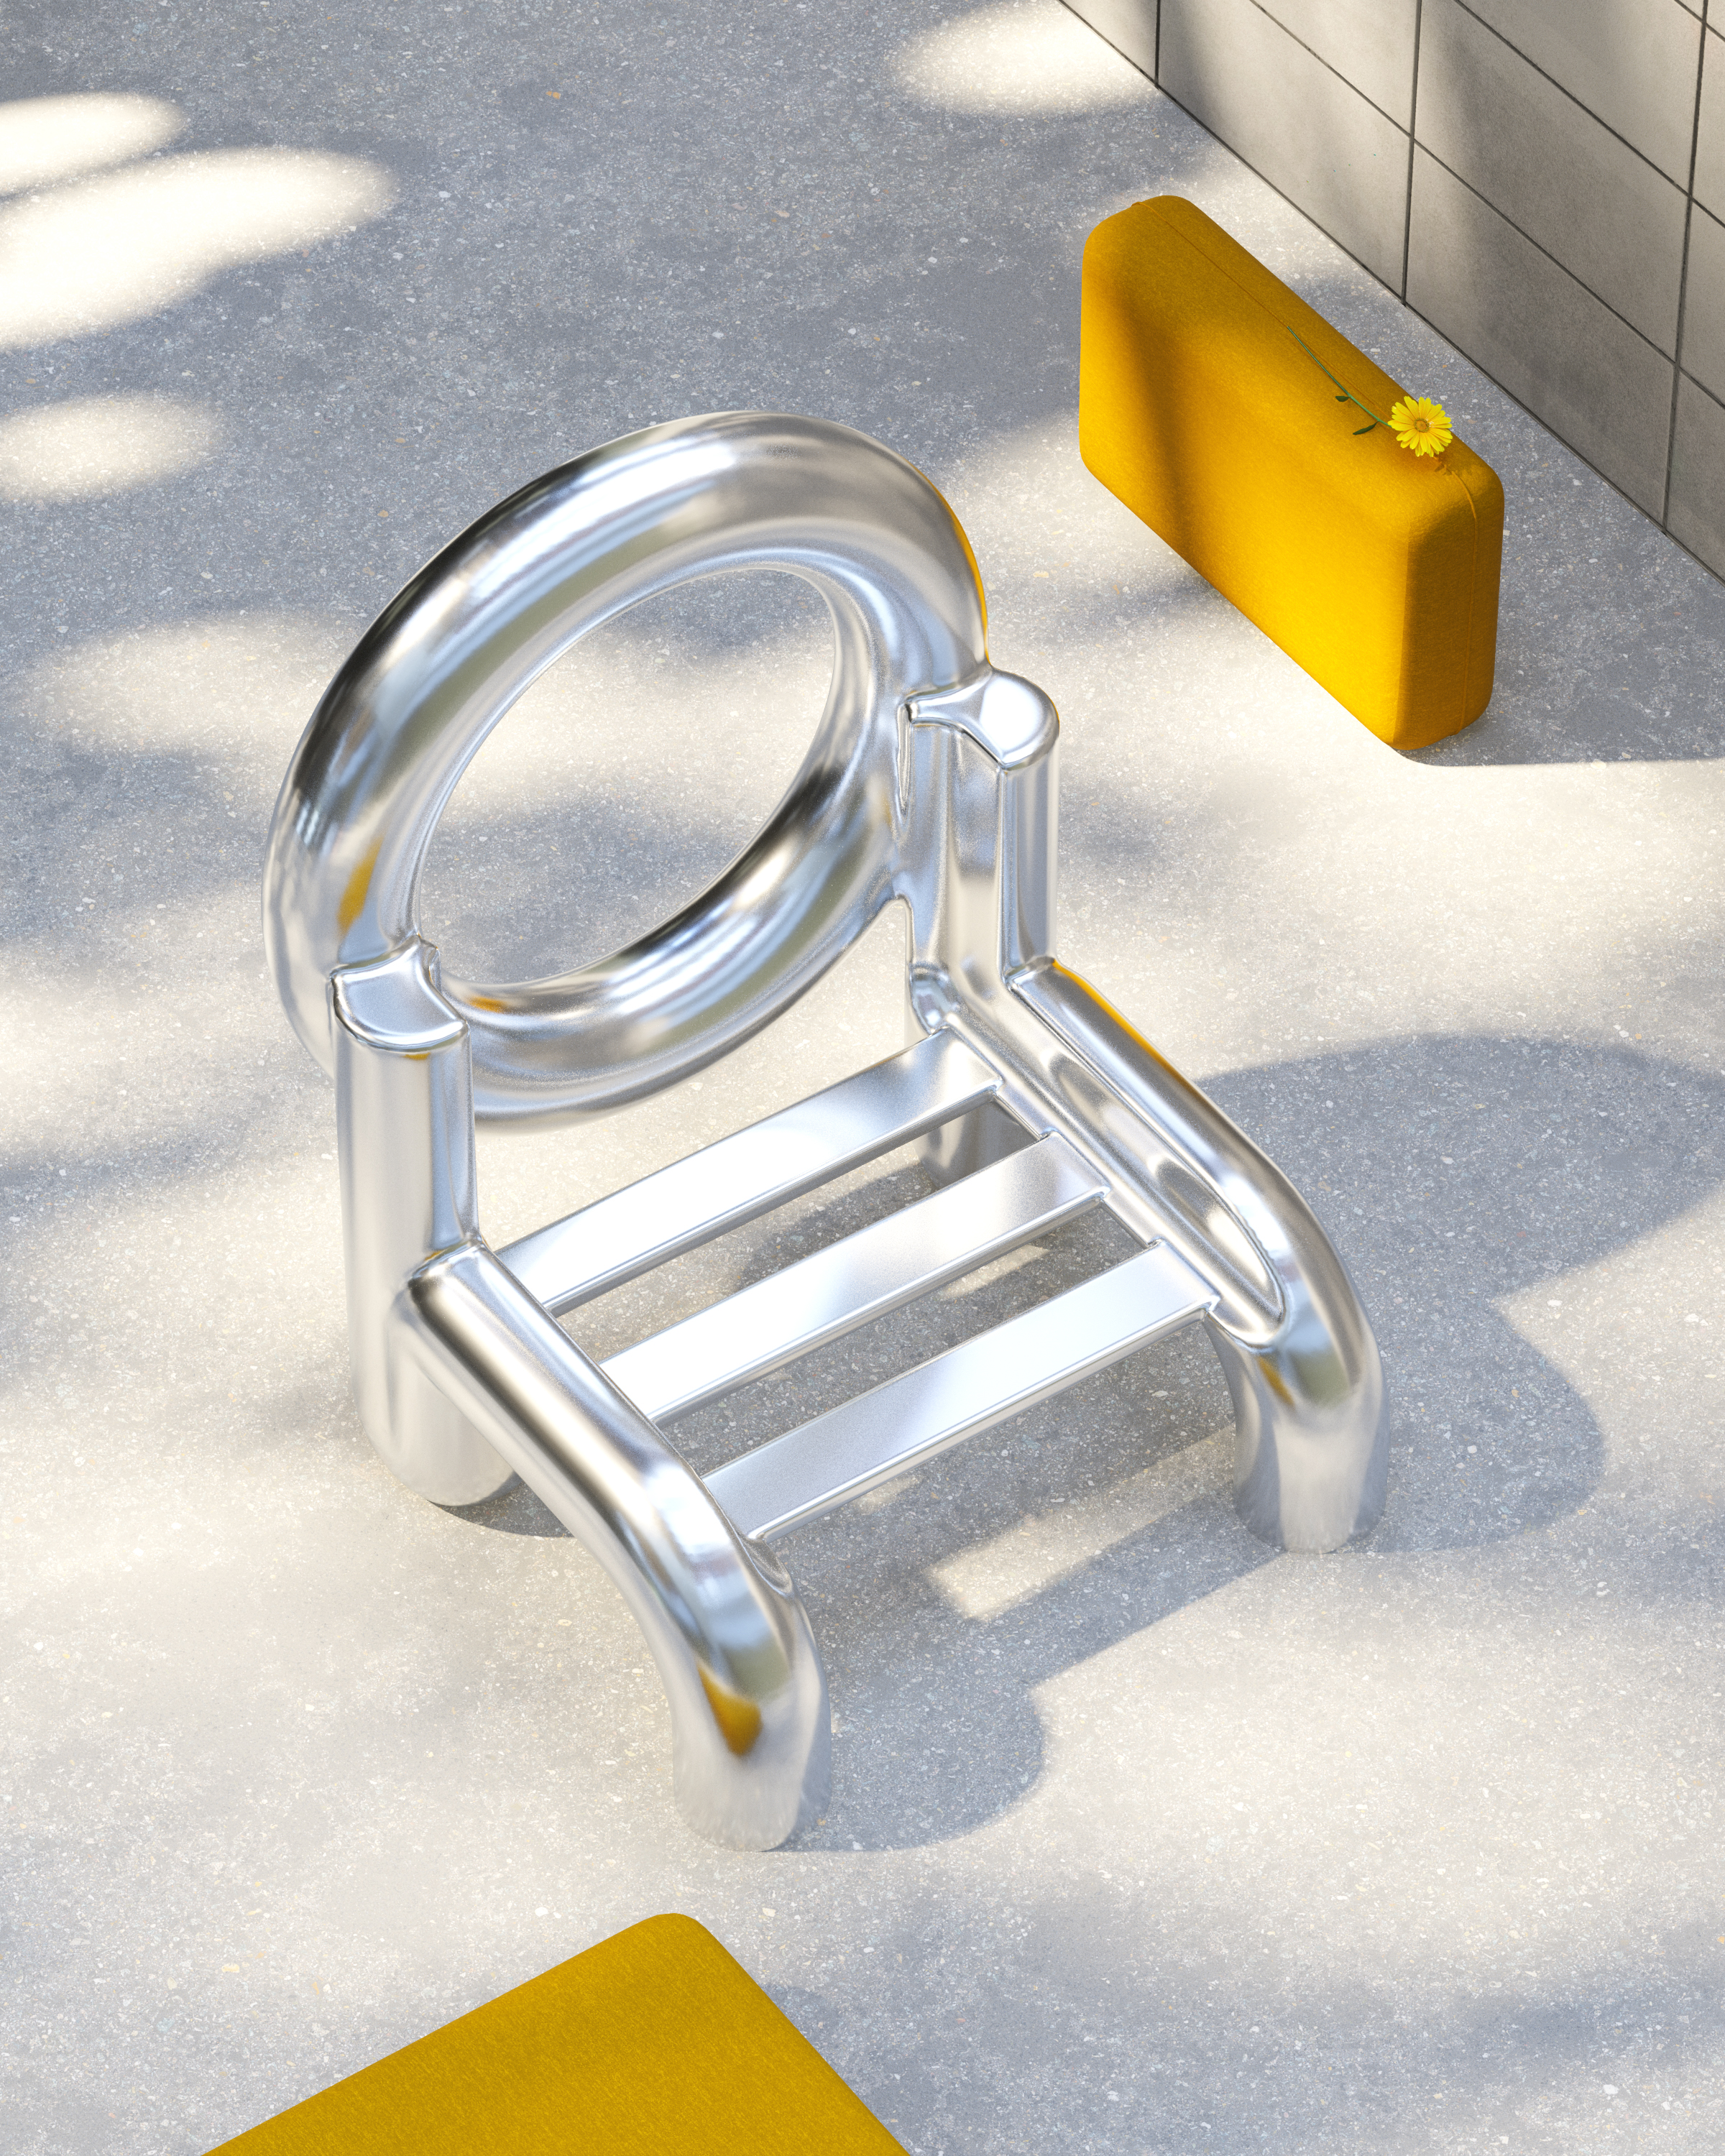 Isolation Chair Image